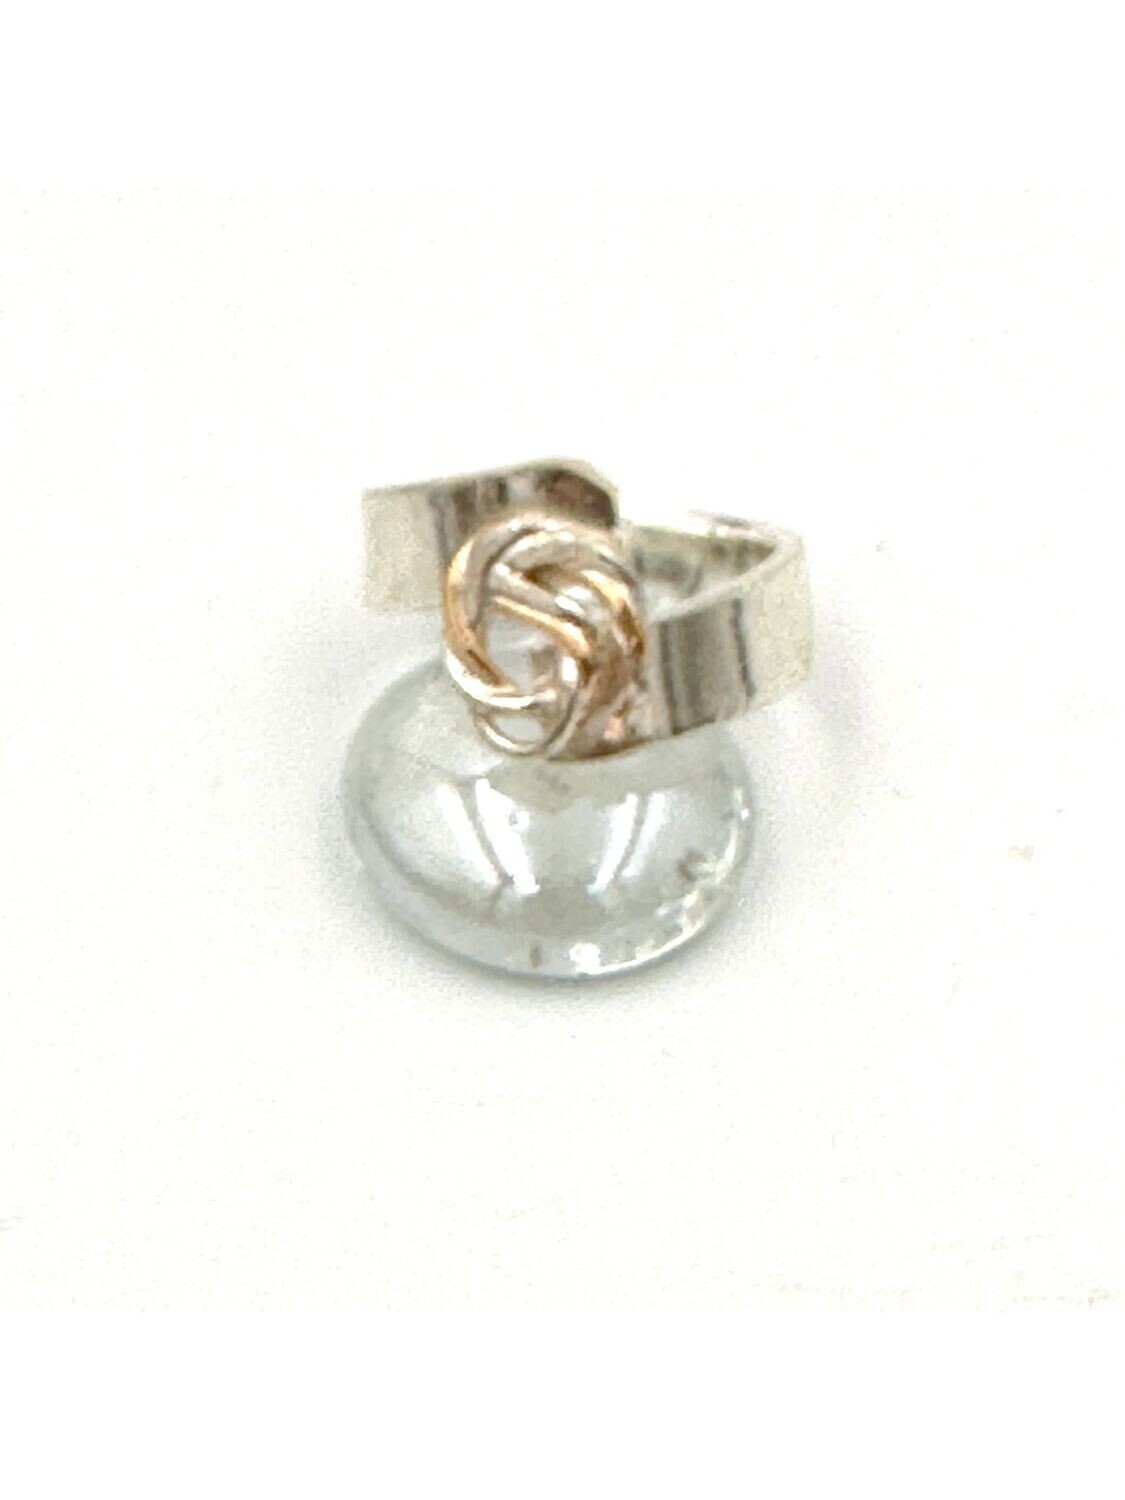 Crossover ring with silver and gold filled spiral detail